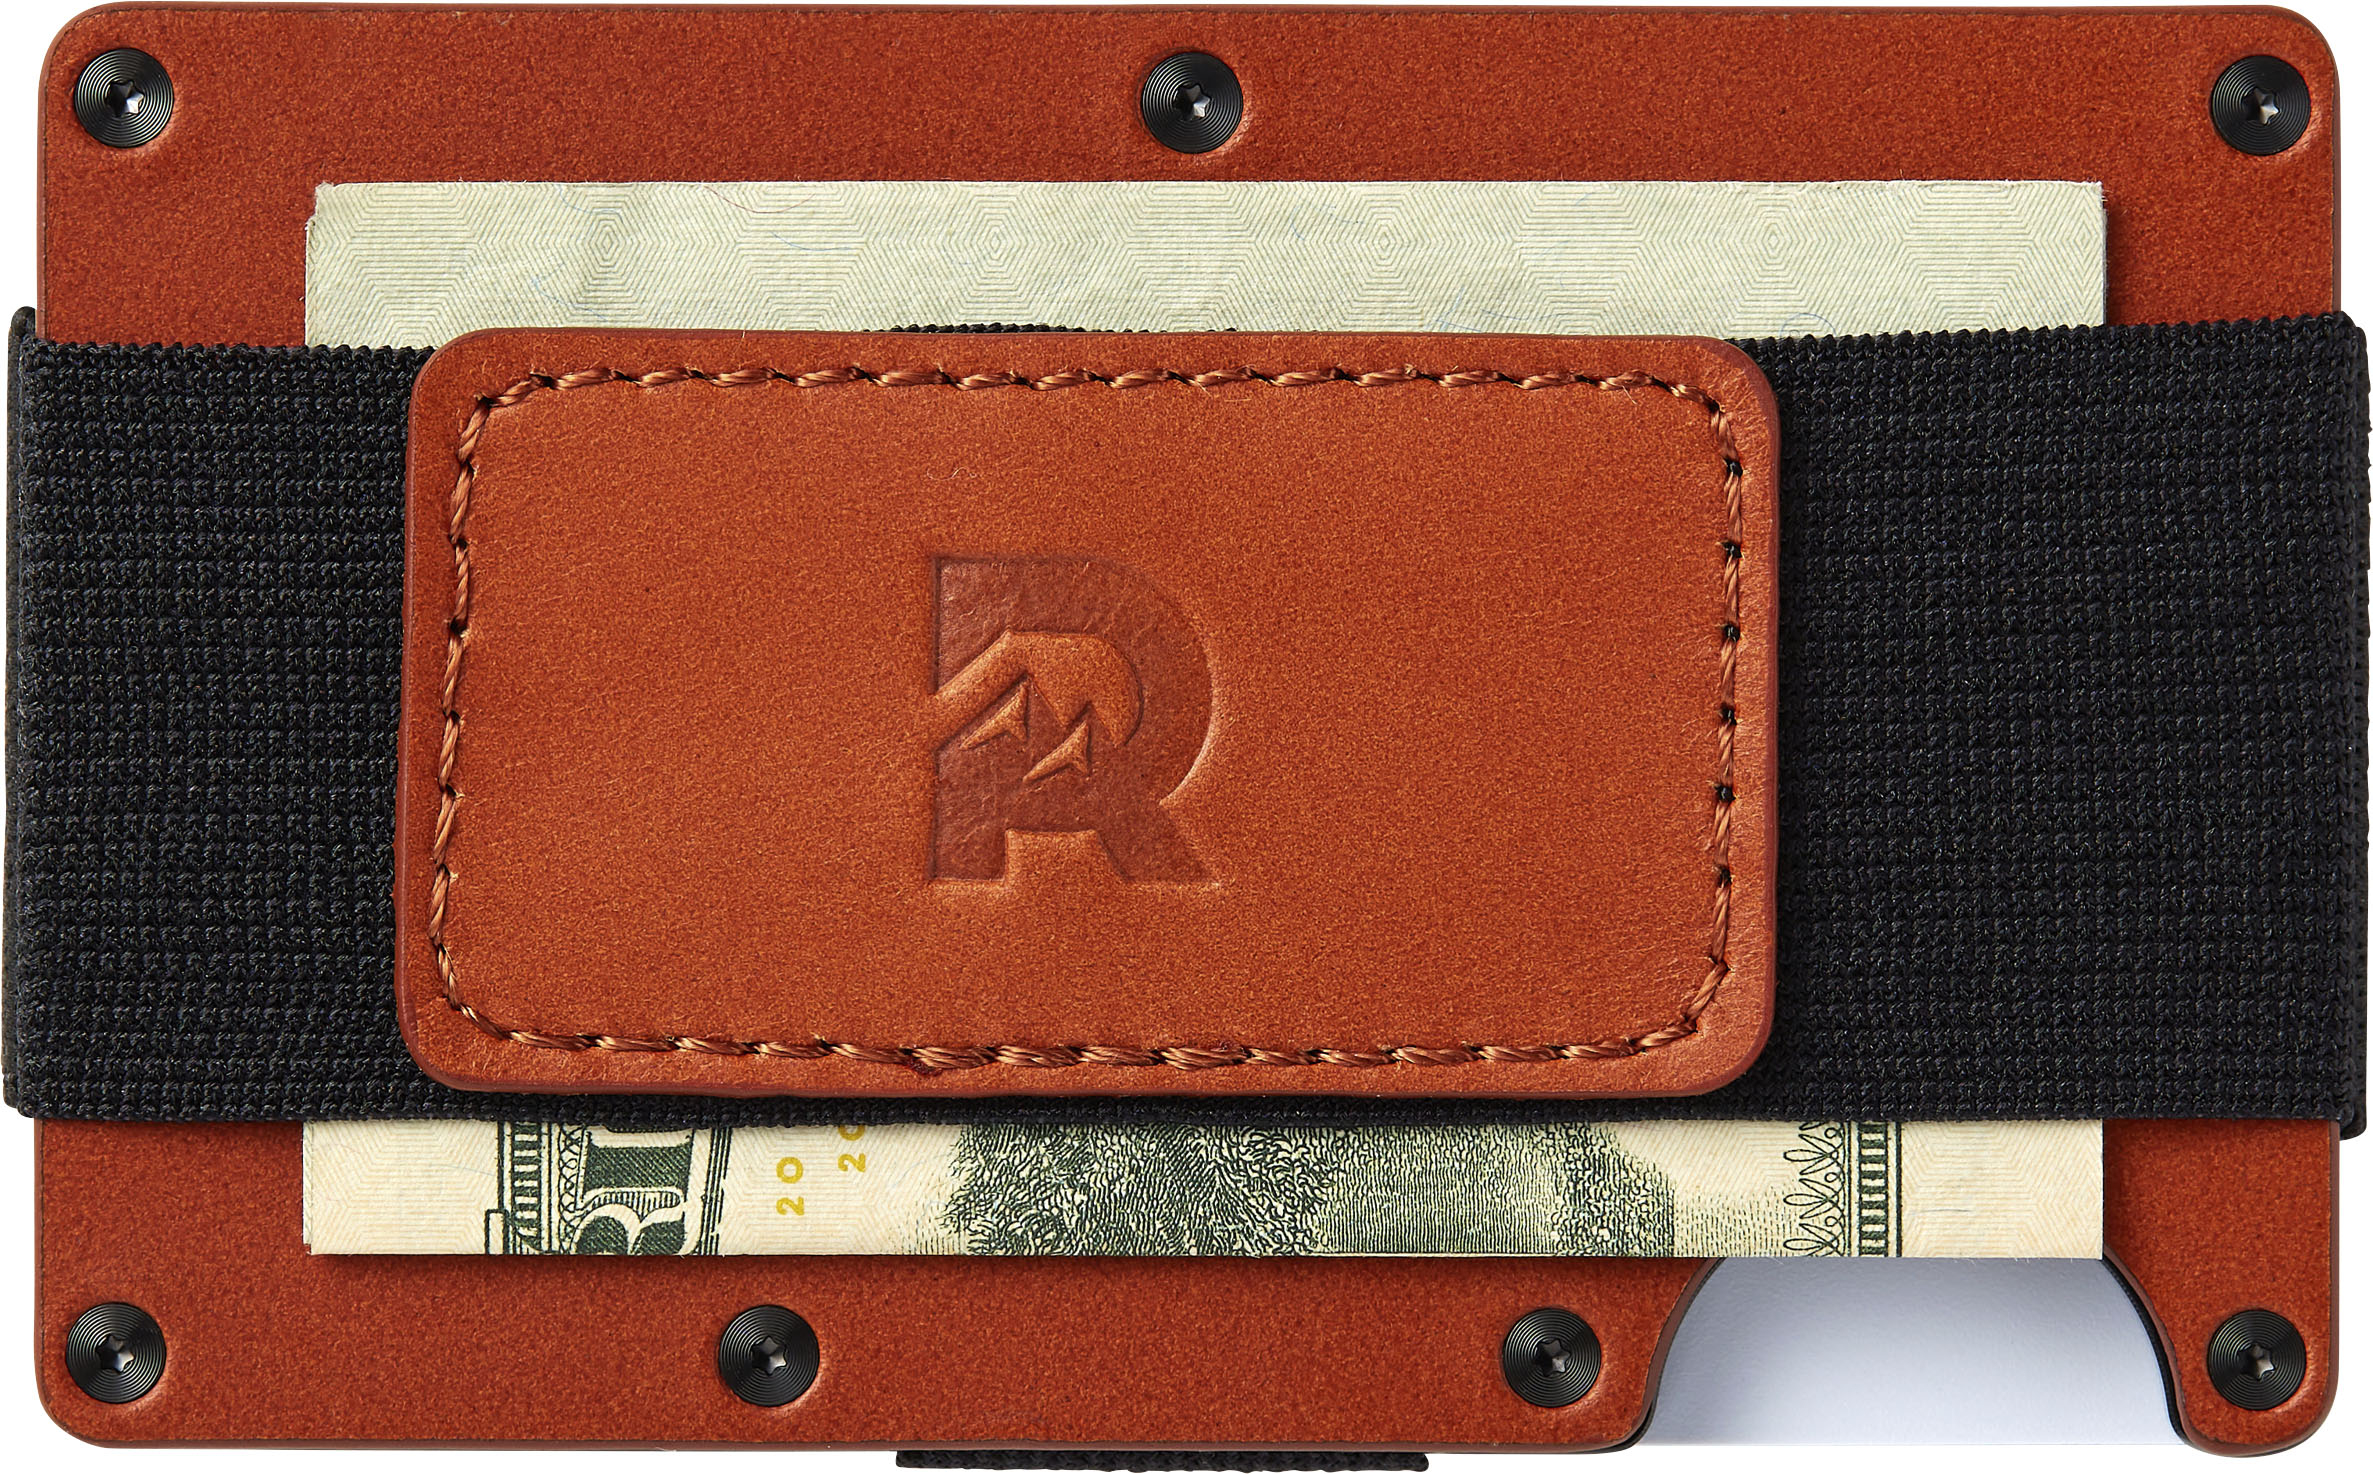 The Ridge Leather Wallet